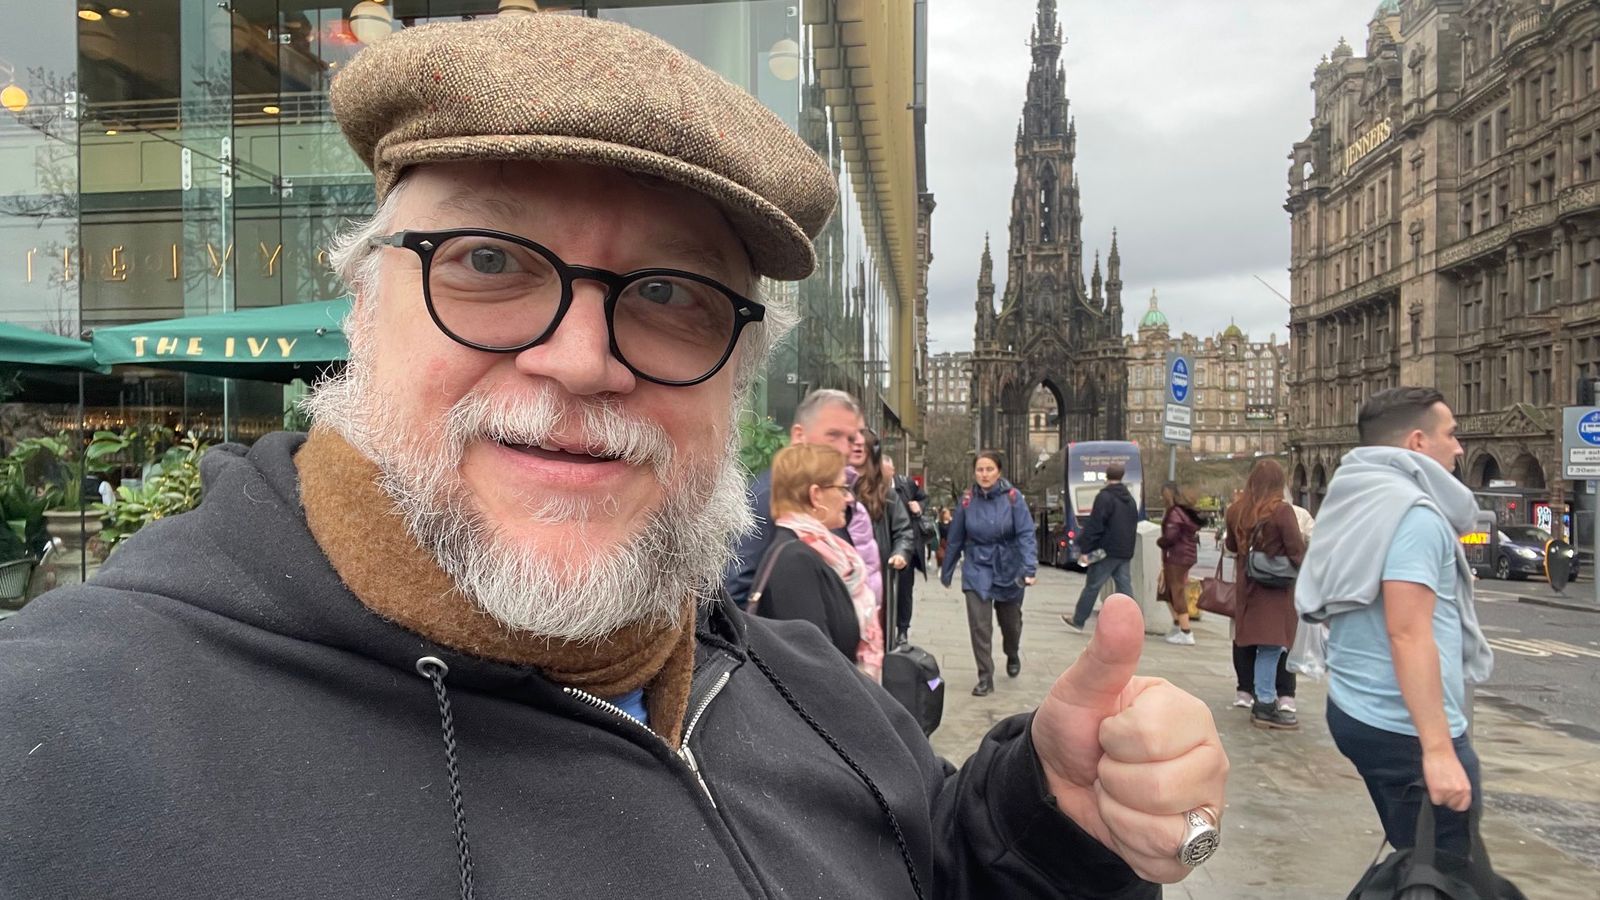 Pinocchio director Guillermo del Toro 'scouting for locations' in Edinburgh as he shares selfie